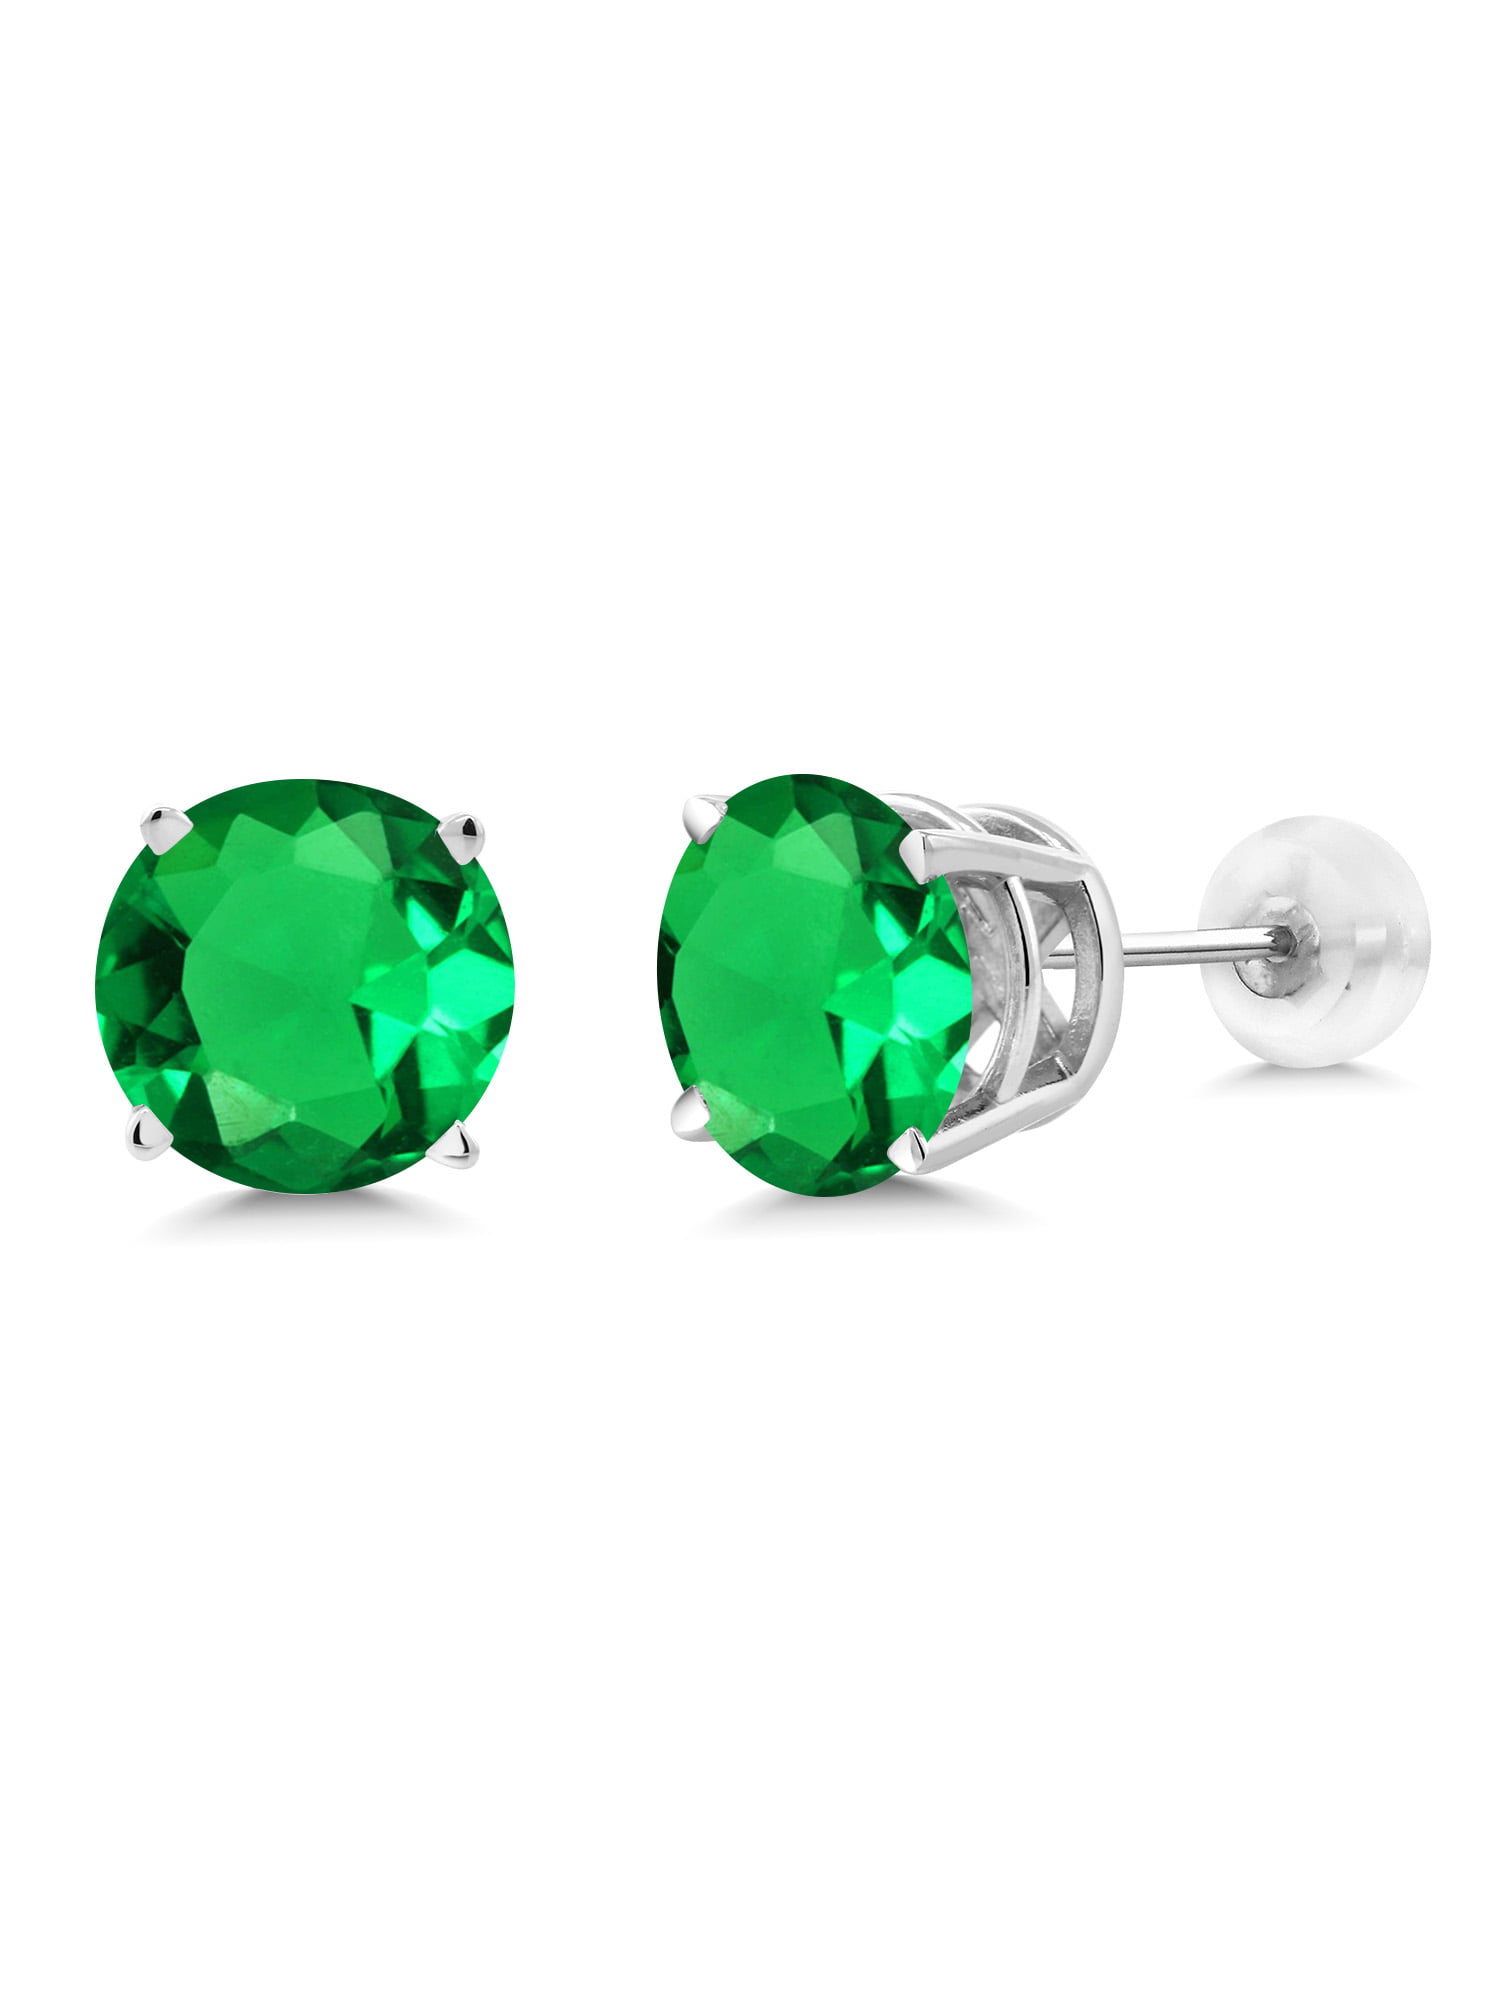 Gem Stone King 14K White Gold Green Simulated Emerald Stud Earrings For  Women (3.30 Cttw, Round 8MM)